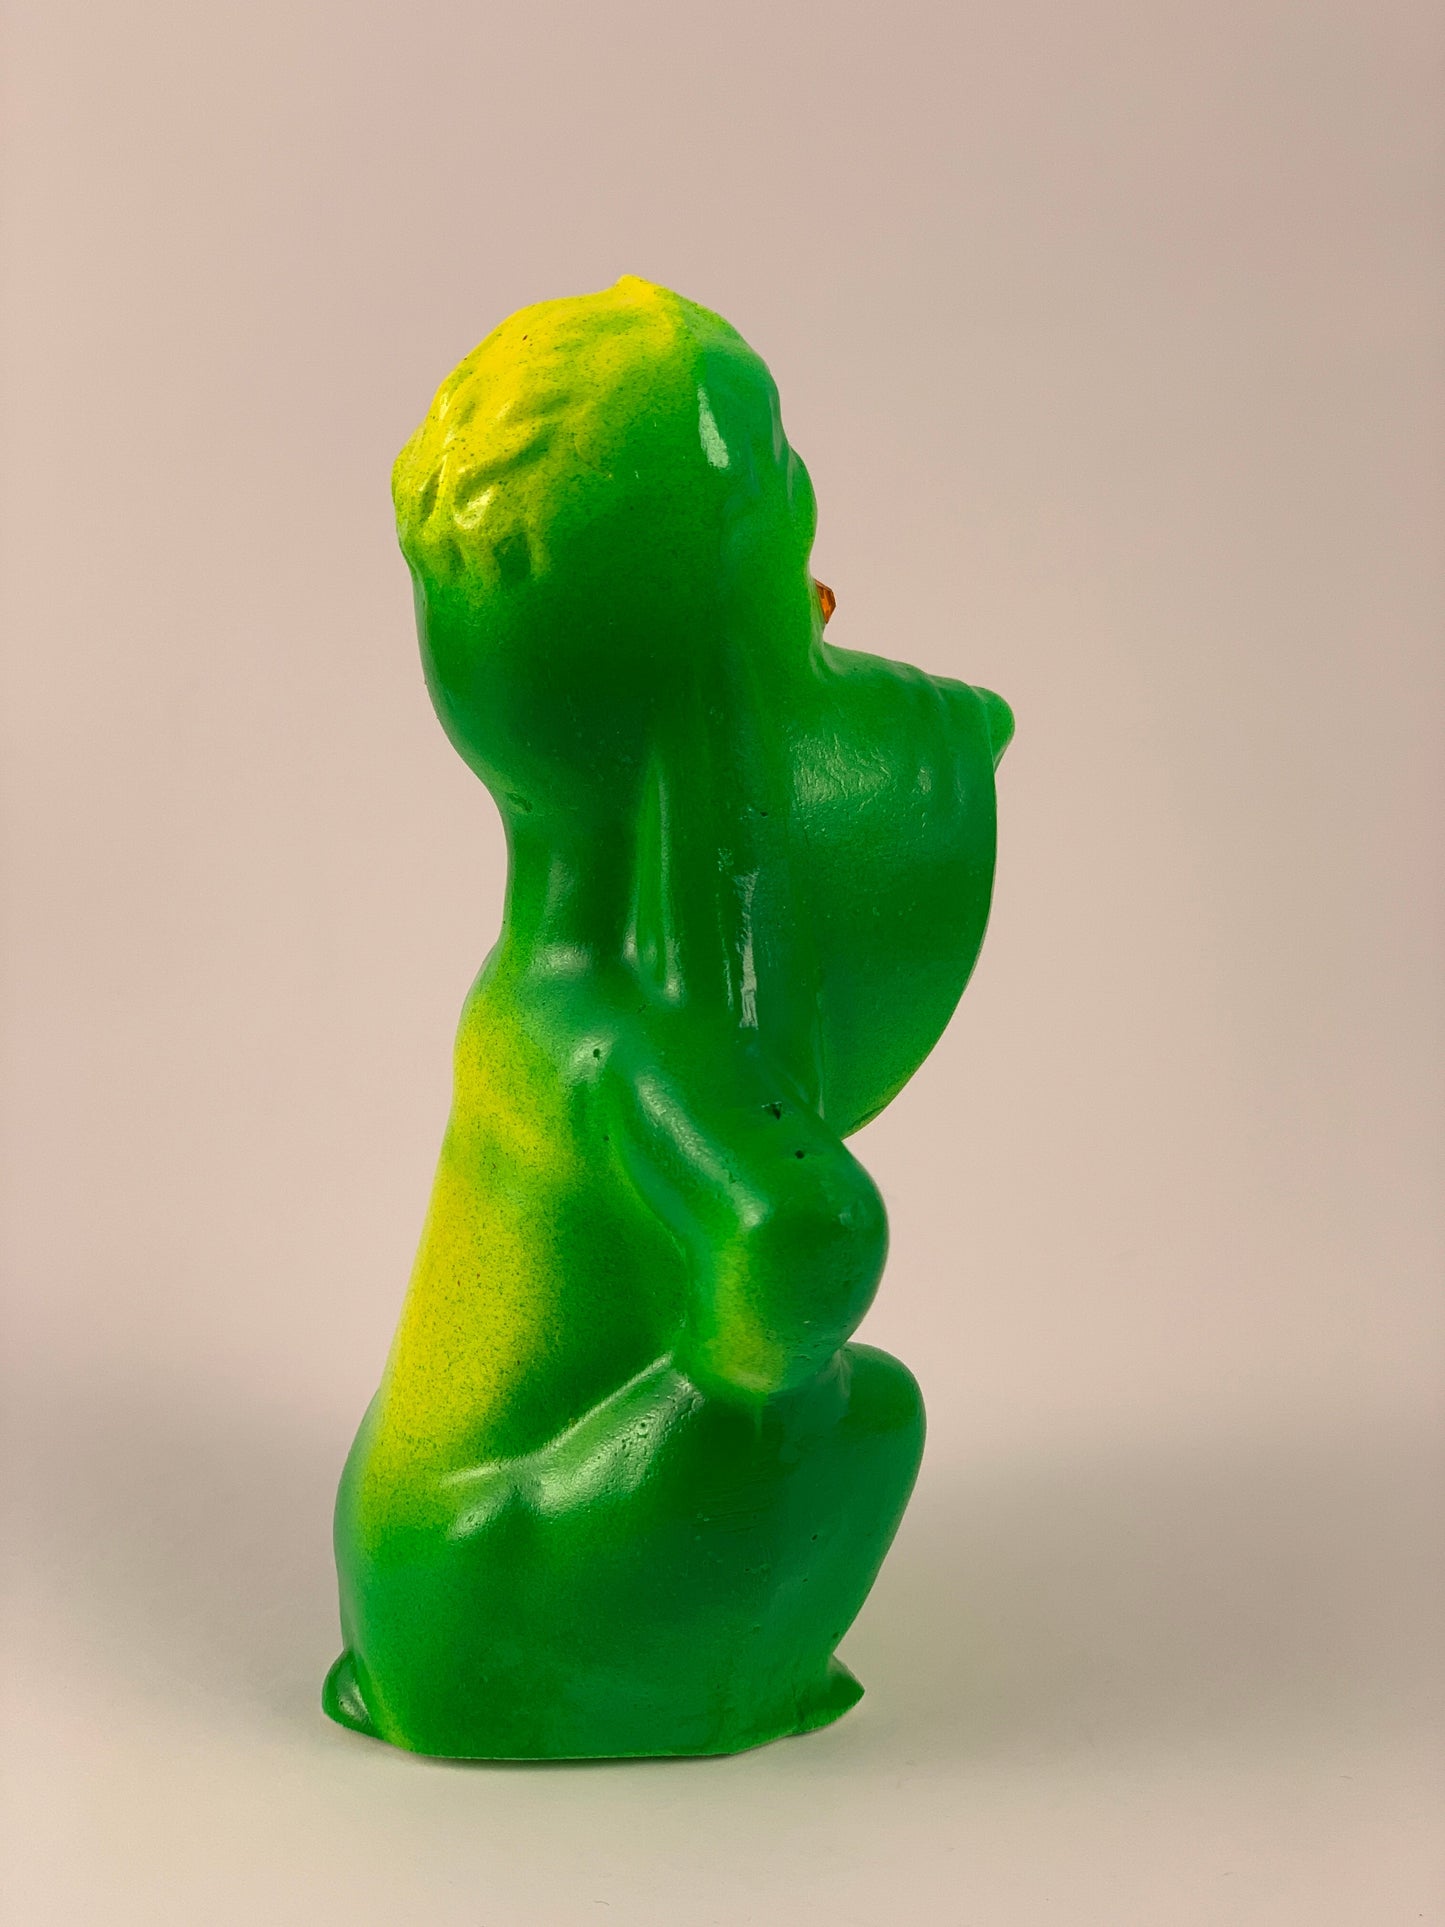 Mister Droopy Chalkware: Green and Yellow